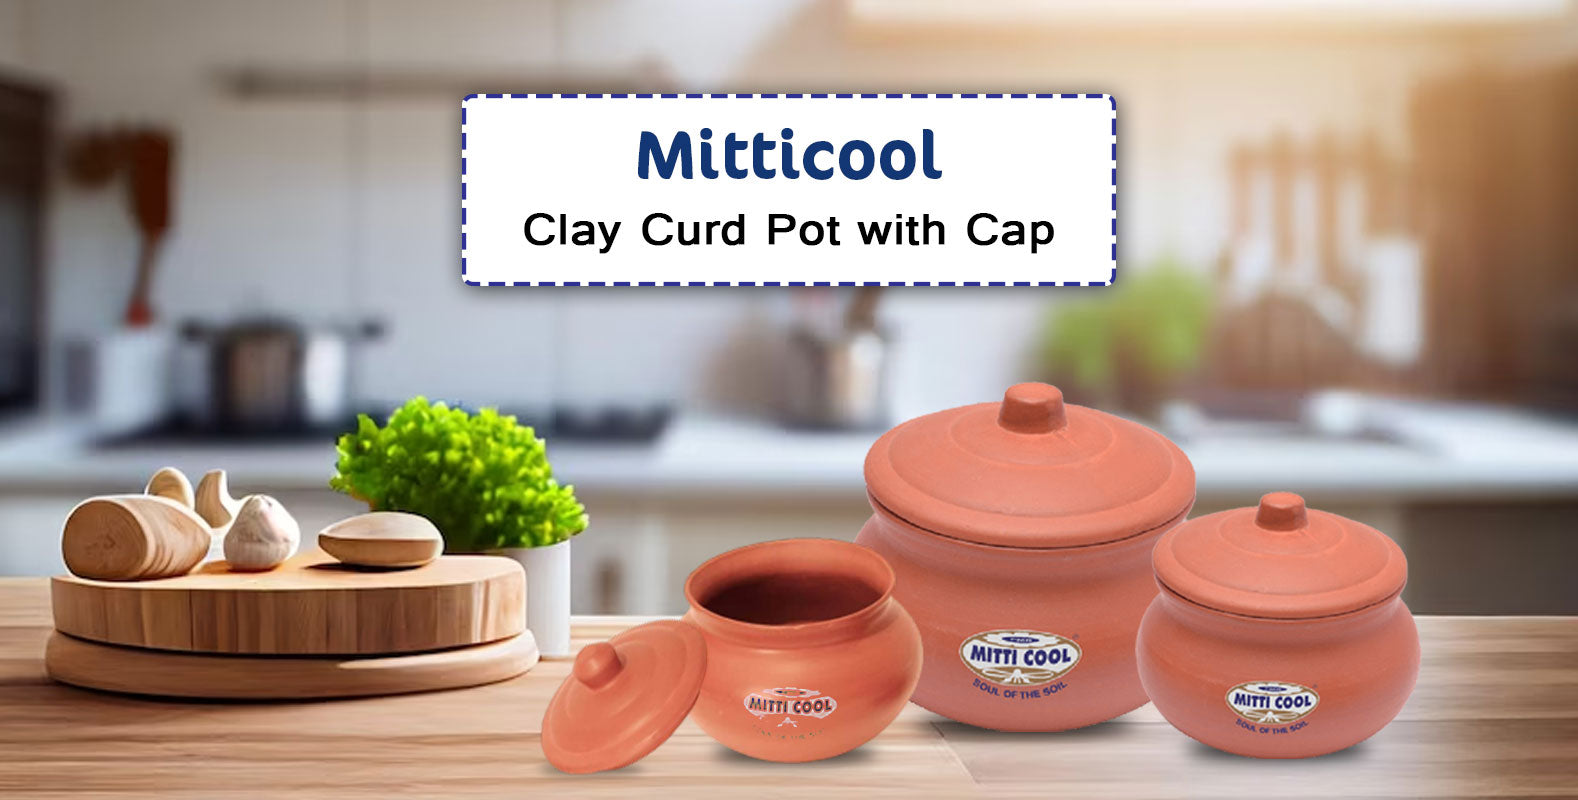 Mitticool Clay Curd Pot with Cap